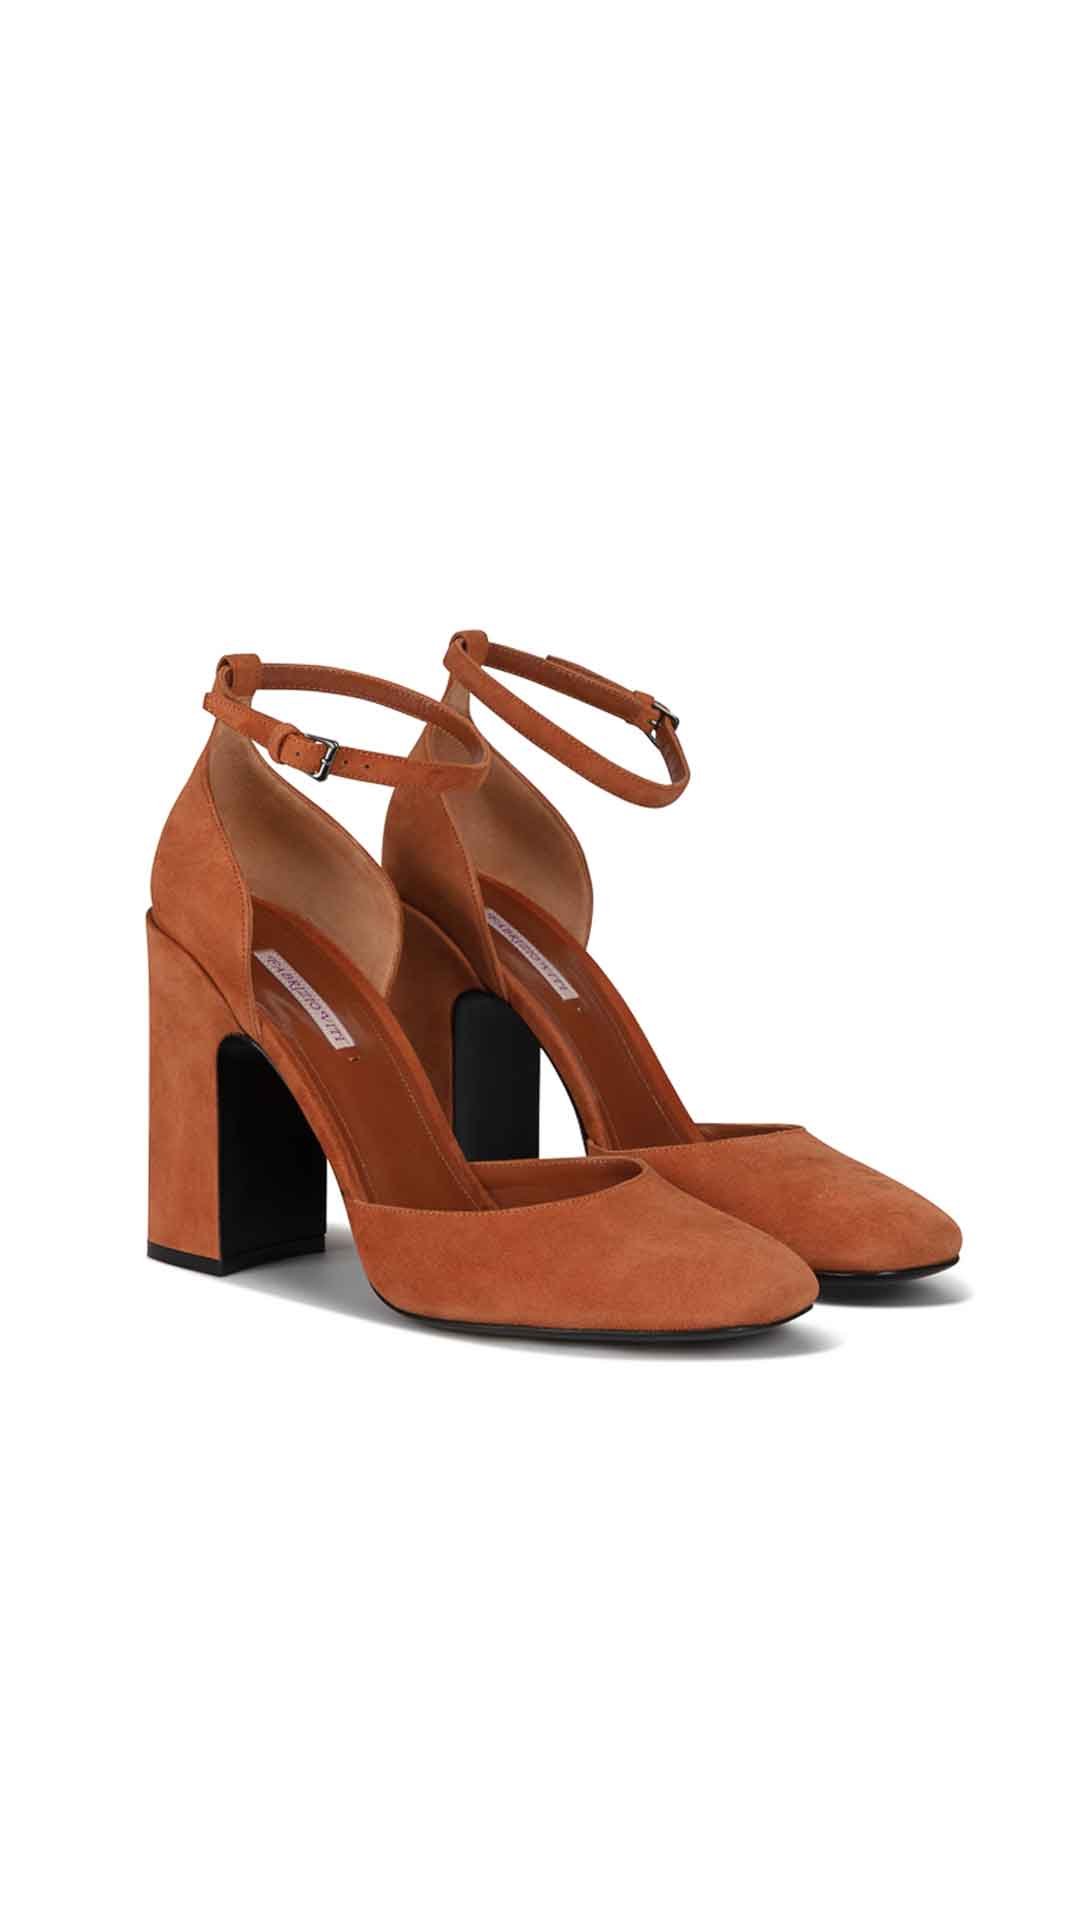 Fabrizio Viti Loren Pump High Heel Created from the most sophisticated suede, this heeled wonder in a caramel brown hue is Fabrizio's contemporary take on the classic Mary Jane. Chunky heel and suede ankle strap. Caramel color suede.